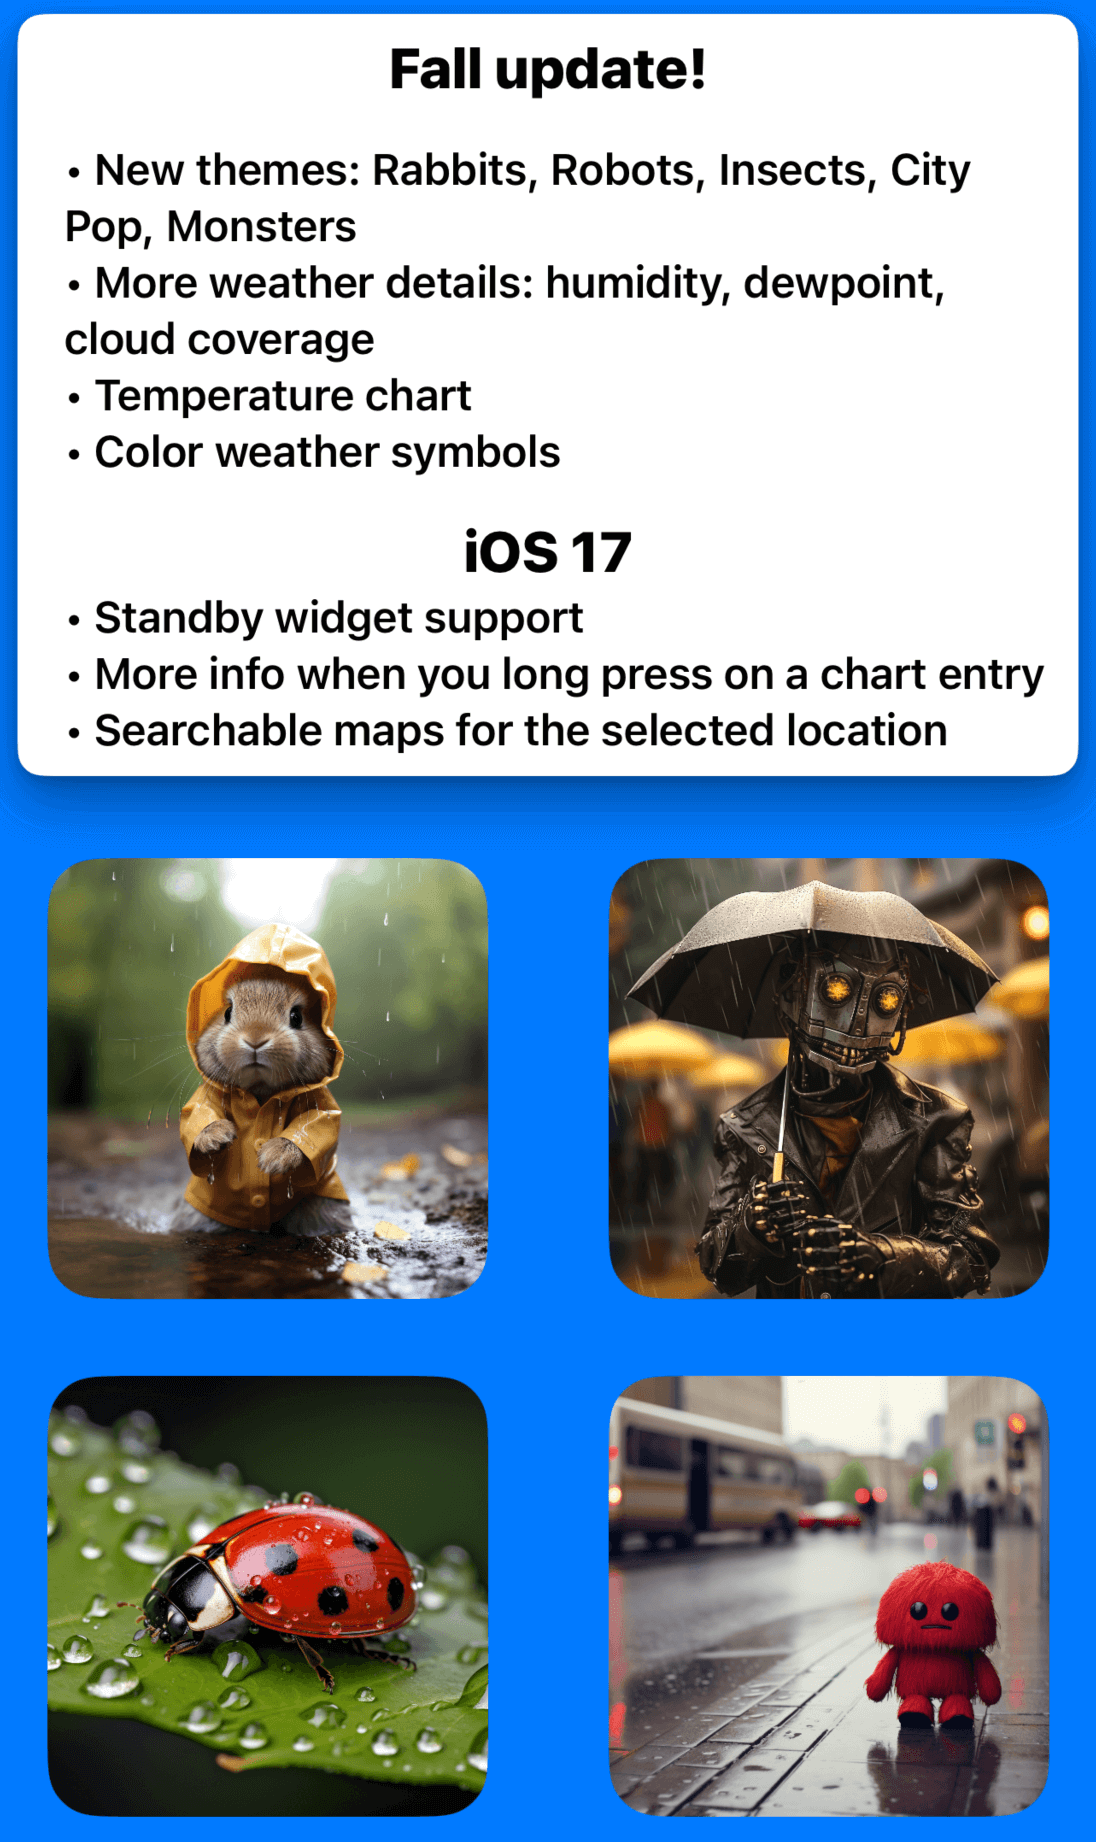 A list of new features and four new rain images. There are pictures of a rabbit in a raincoat, a robot holding an umbrella, a ladybug on a rain covered leaf, and a monster in smoky clouds.